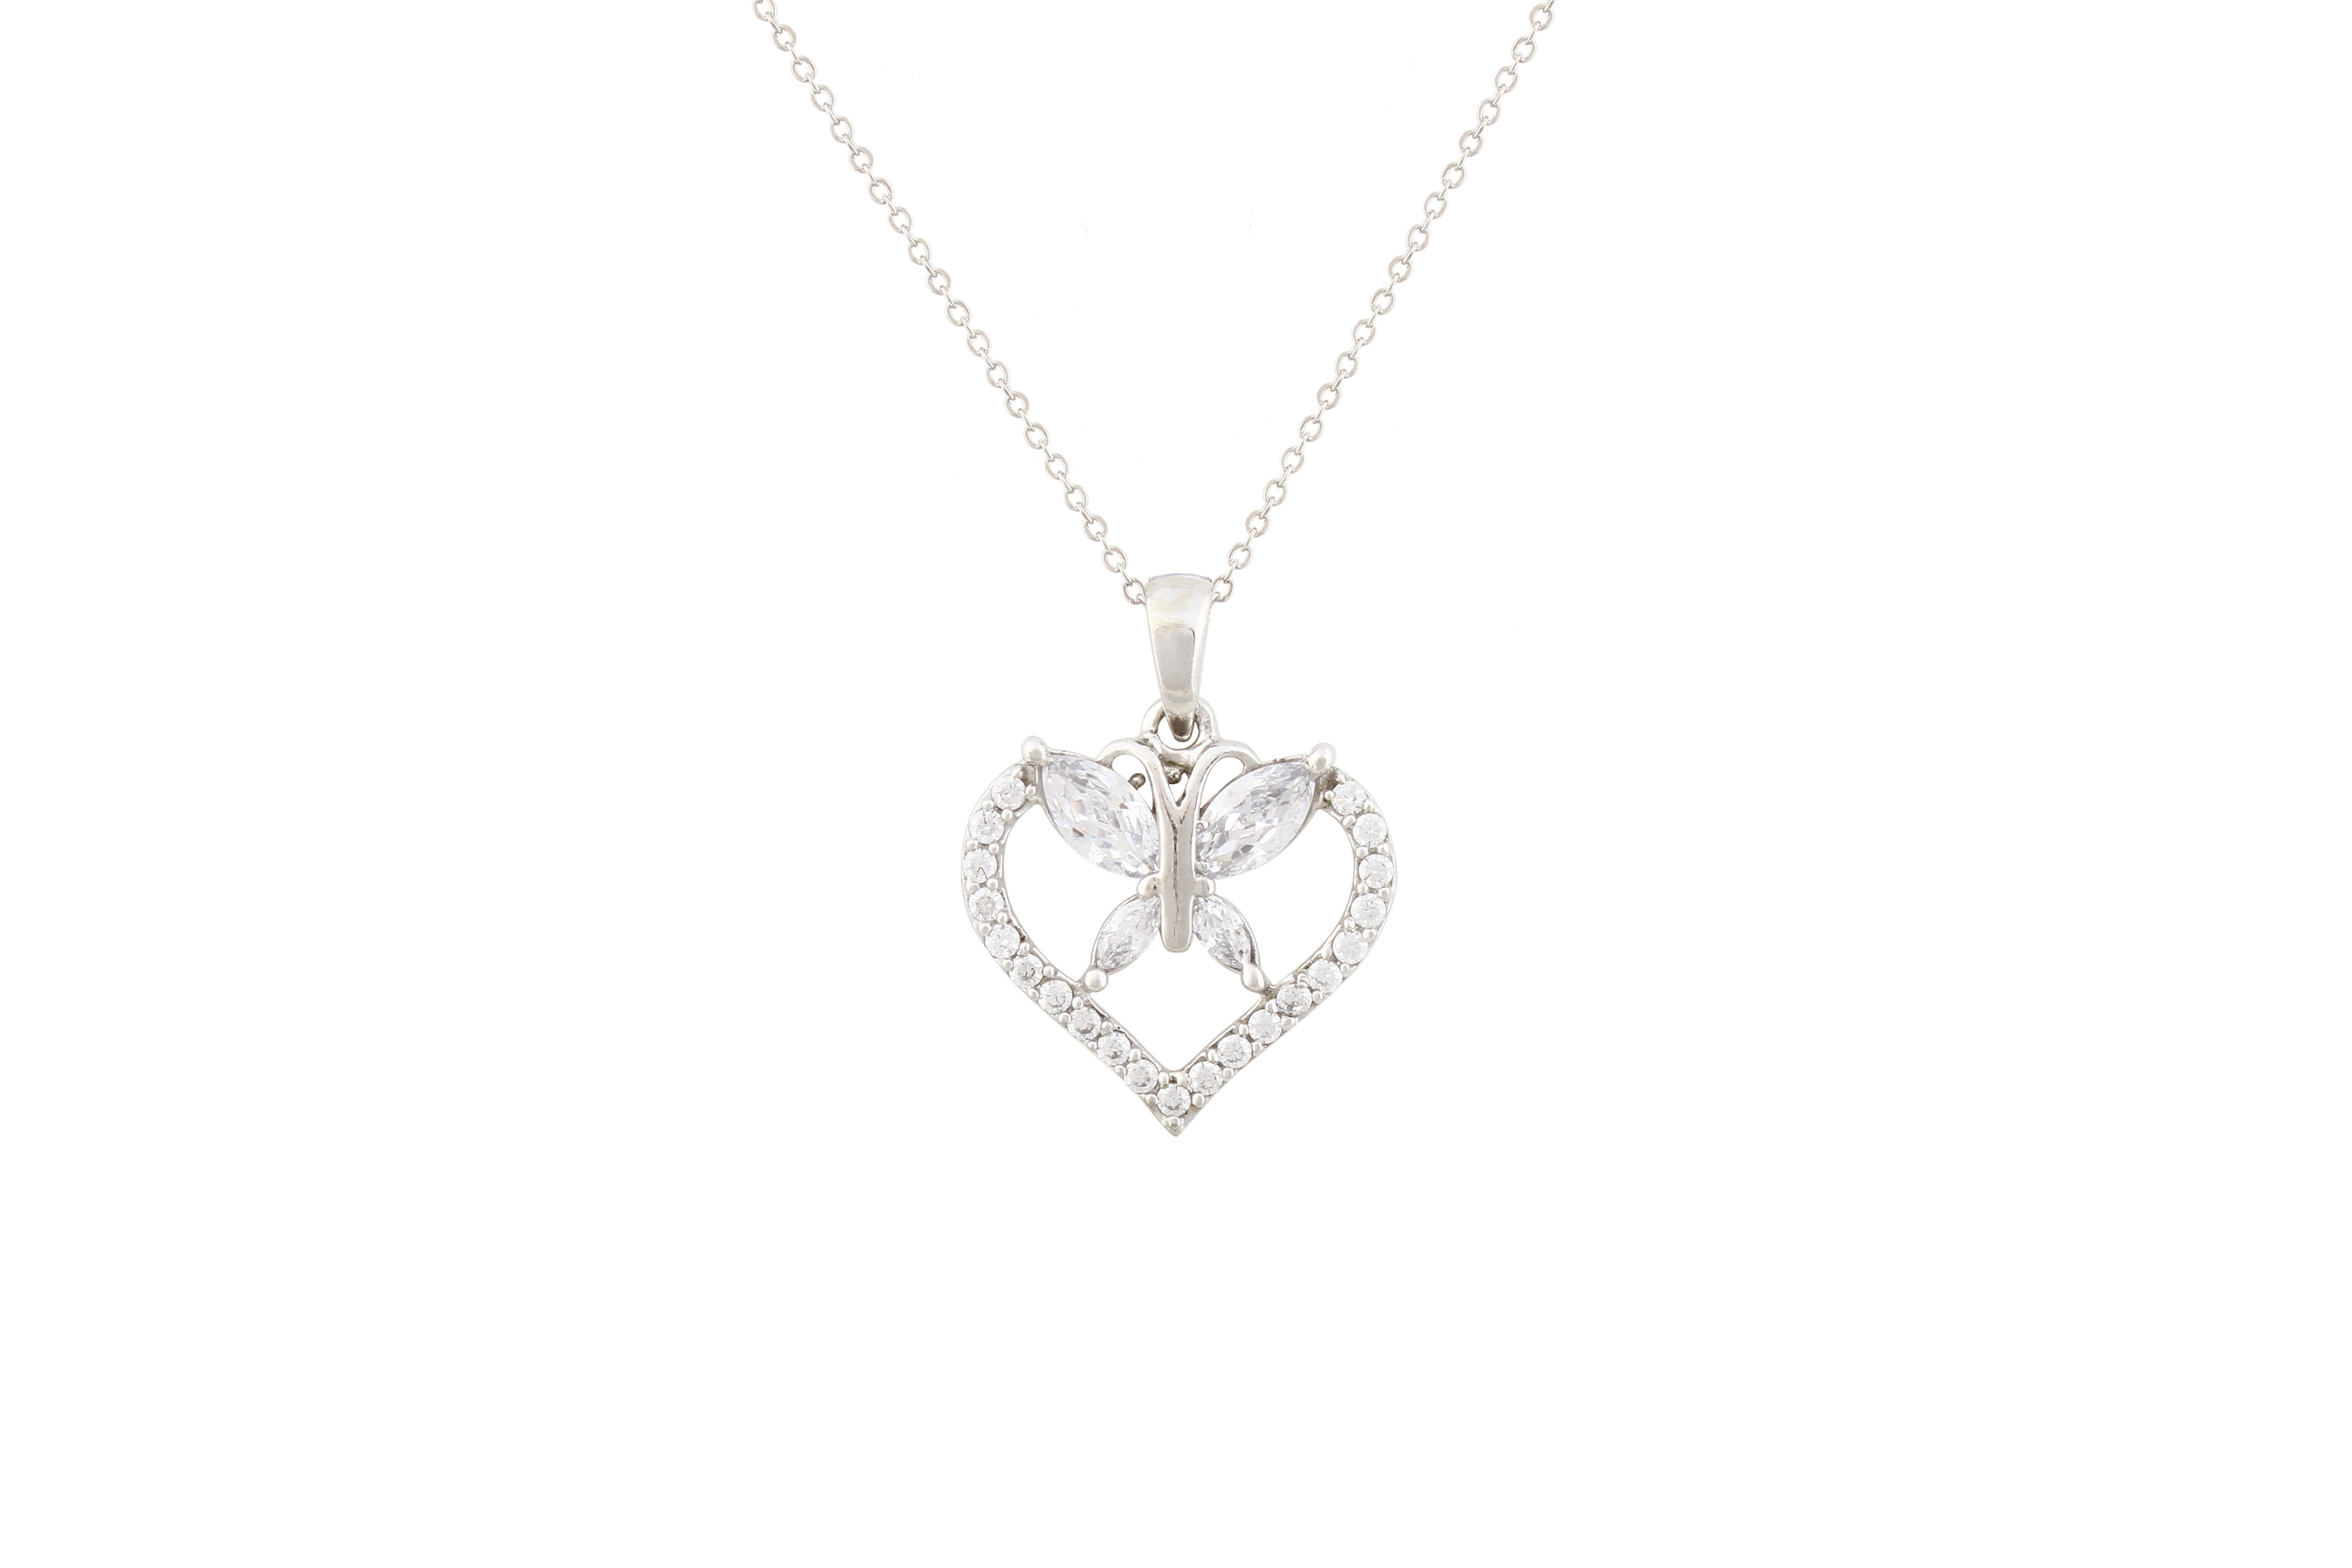 Asfour Crystal Chain Necklace With Heart Pendant In 925 Sterling Silver NA0006-W